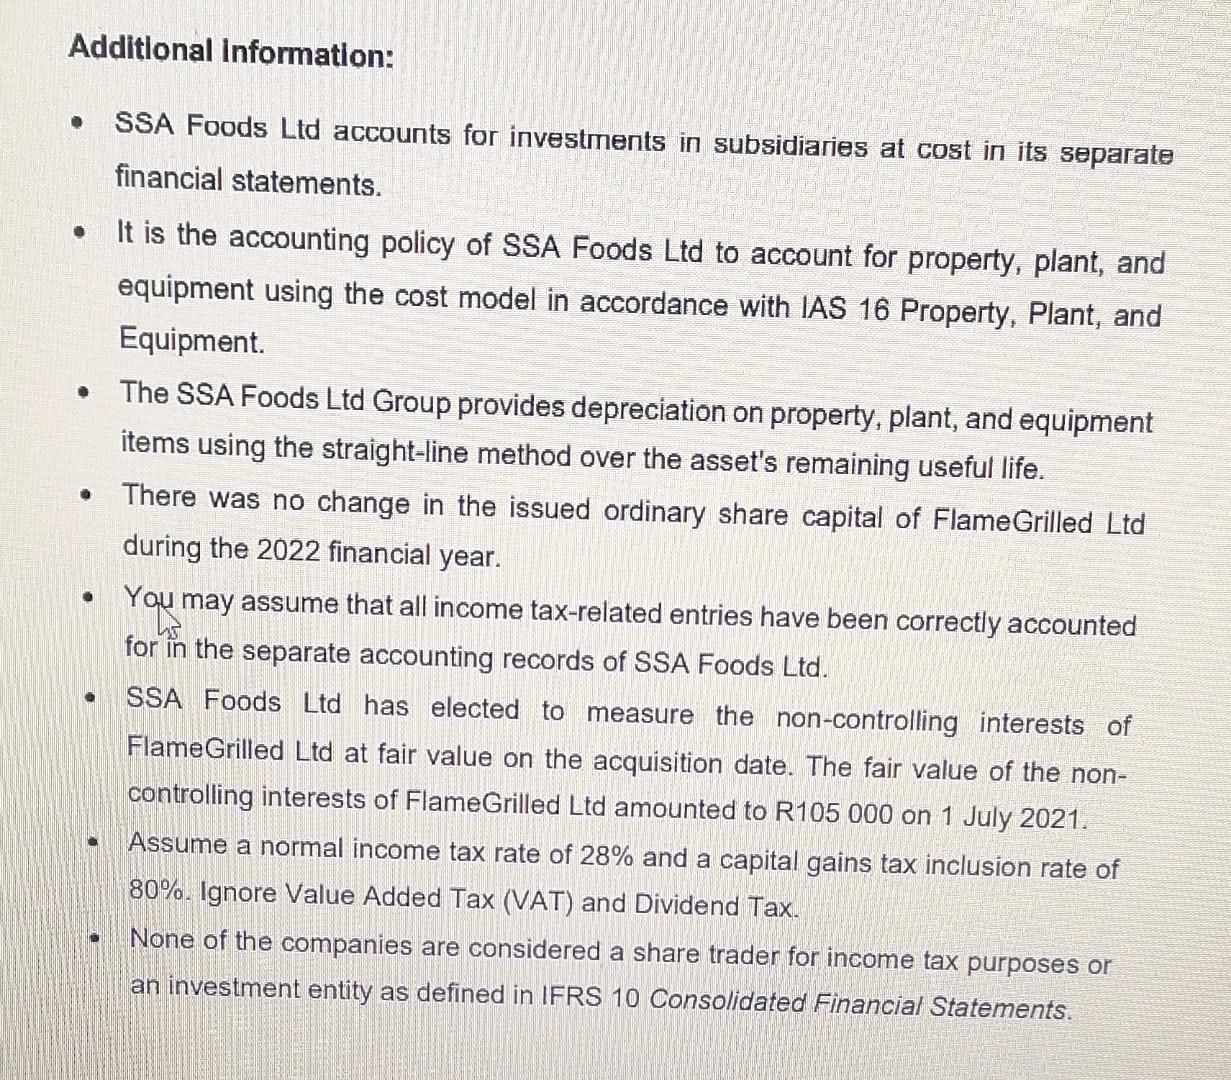 - SSA Foods Ltd accounts for investments in subsidiaries at cost in its separate financial statements. - It is the accounting